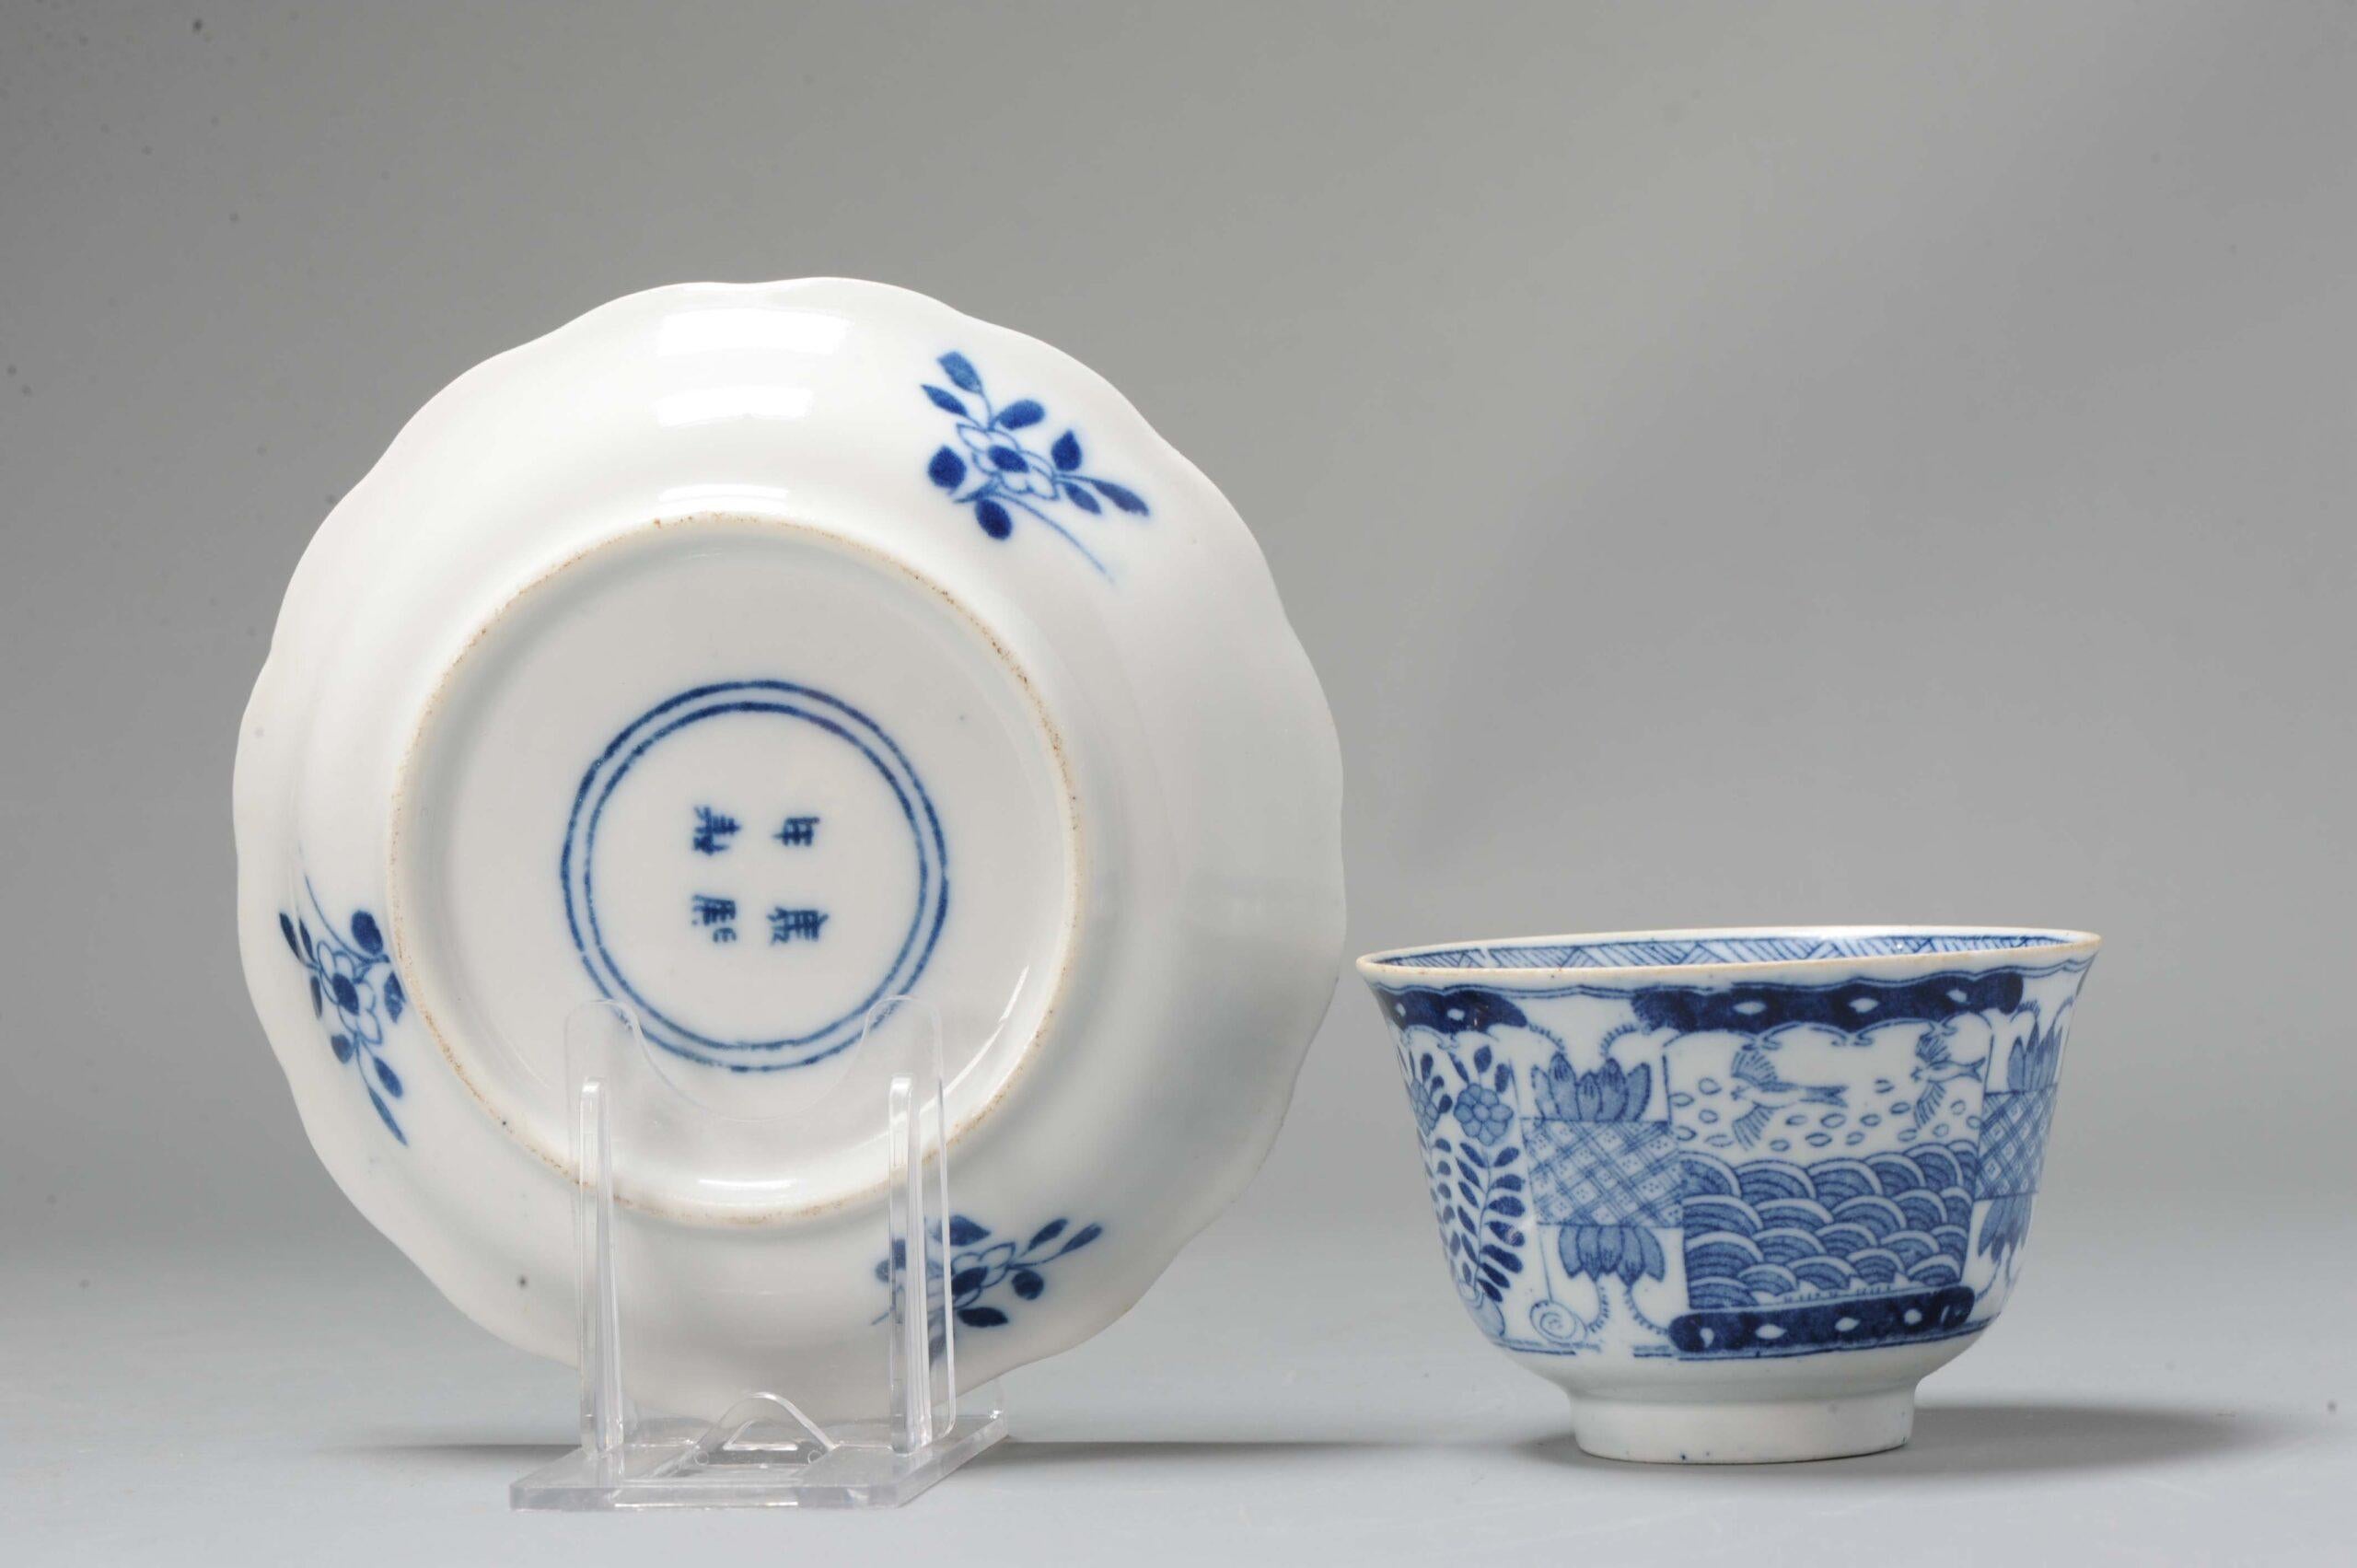 Kangxi Revival Chinese Porcelain Tea Bowl & Dish Parsley Kangxi Marked, 19th Cen In Good Condition For Sale In Amsterdam, Noord Holland